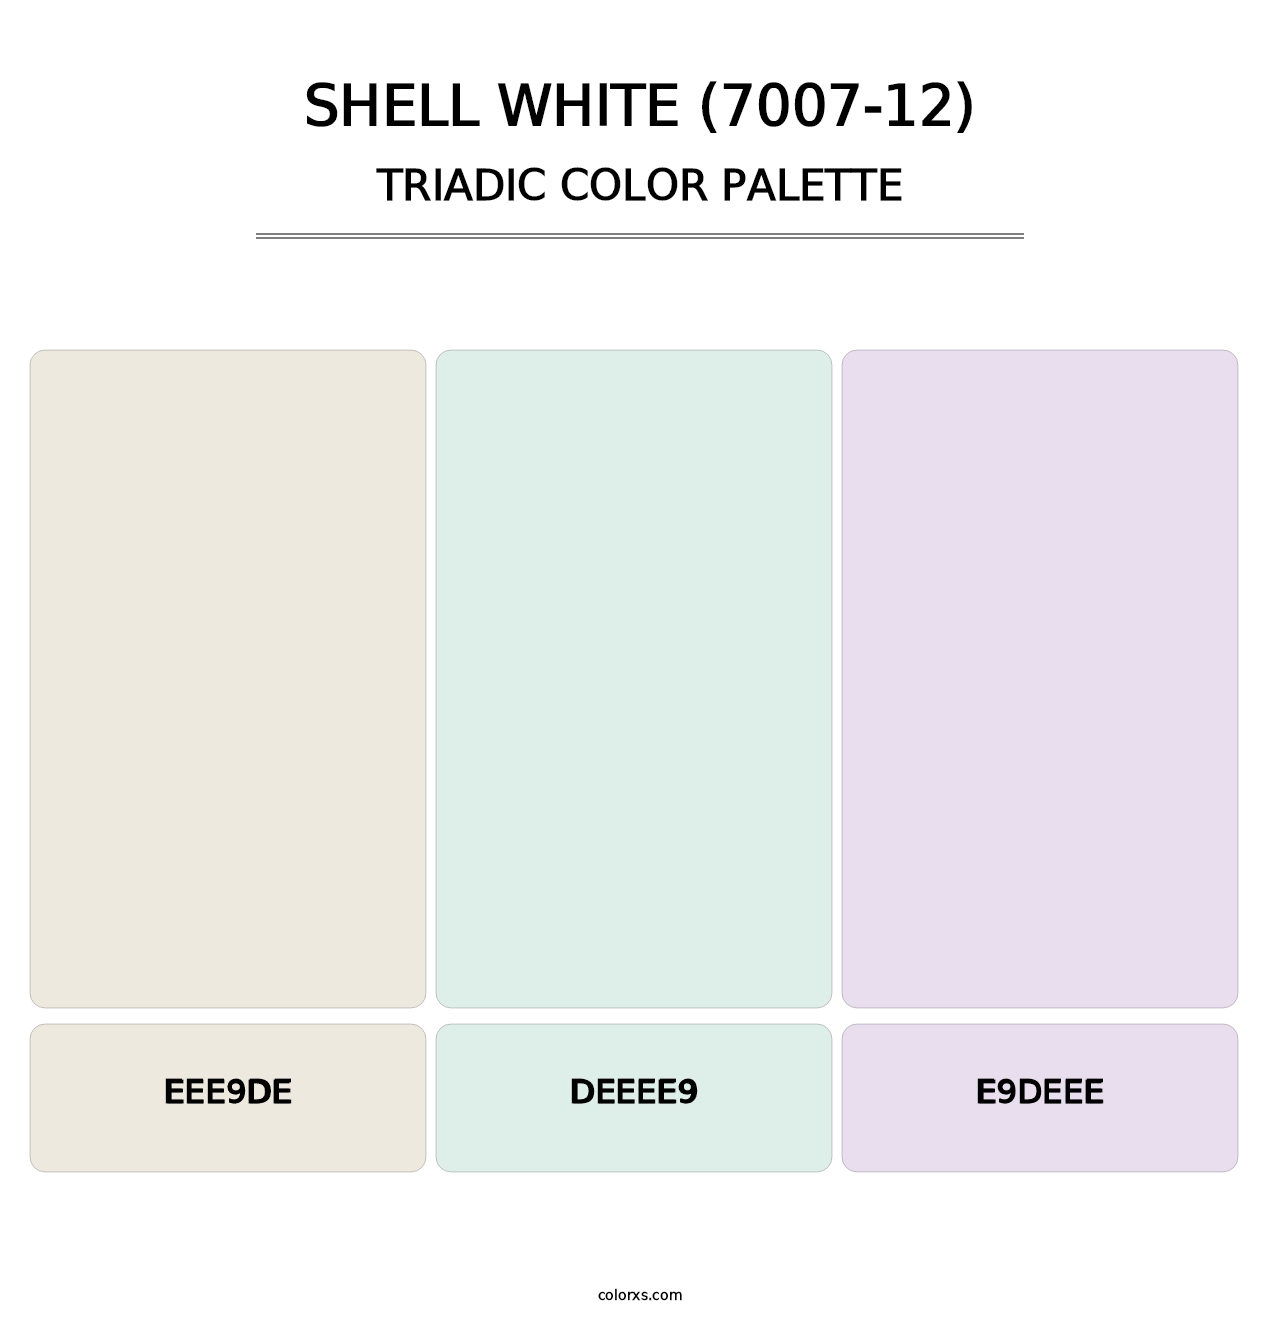 Shell White (7007-12) - Triadic Color Palette